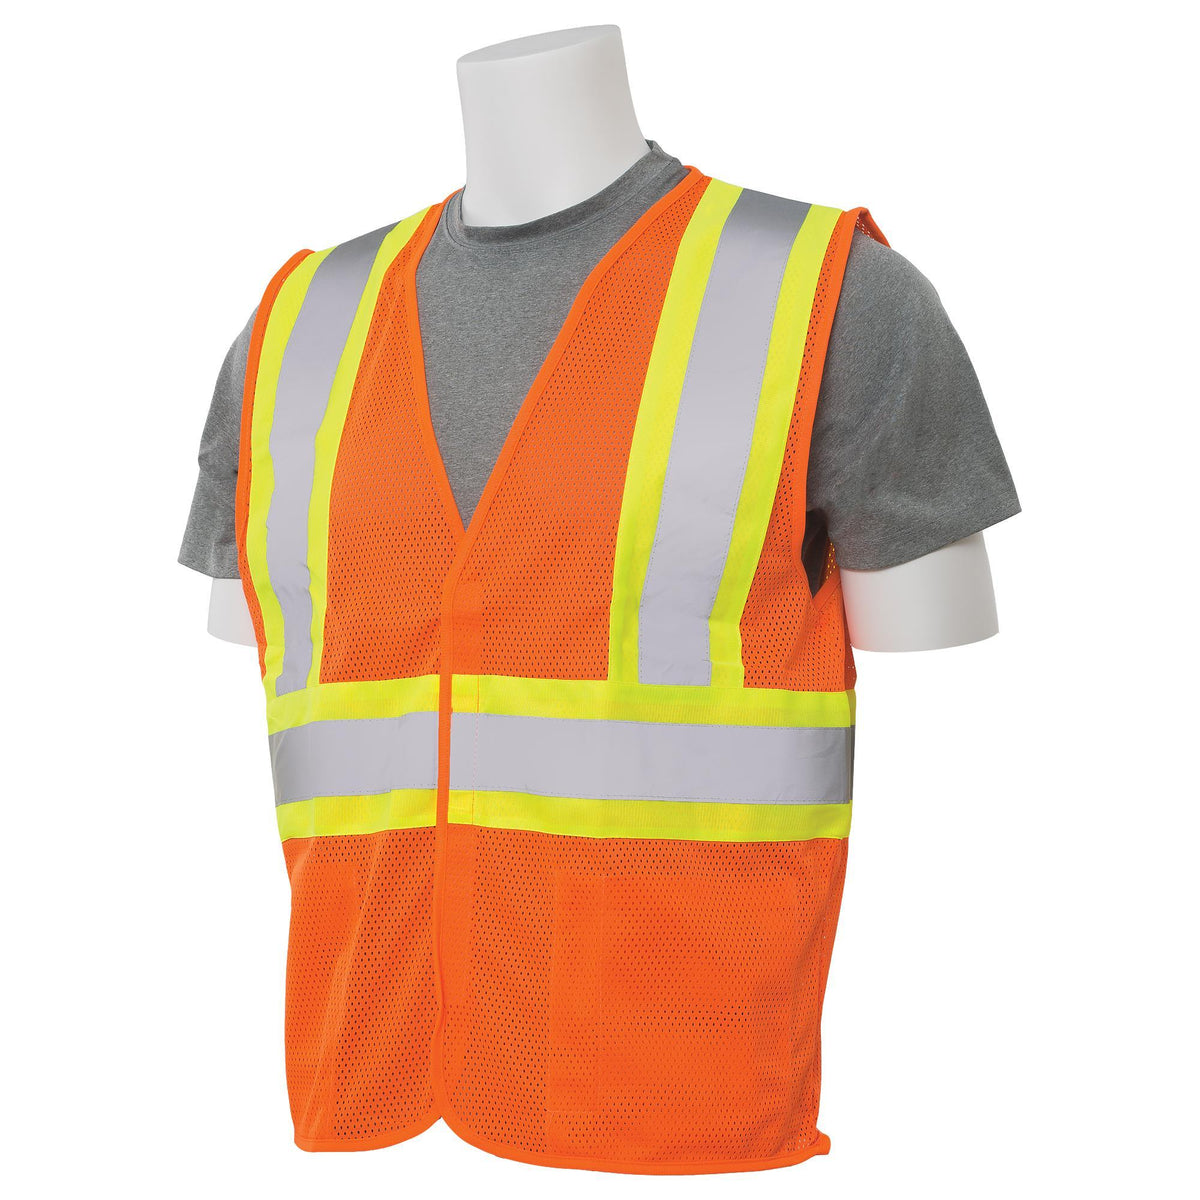 S382 Class 2 Mesh Safety Vest with Contrasting Tape 1PC